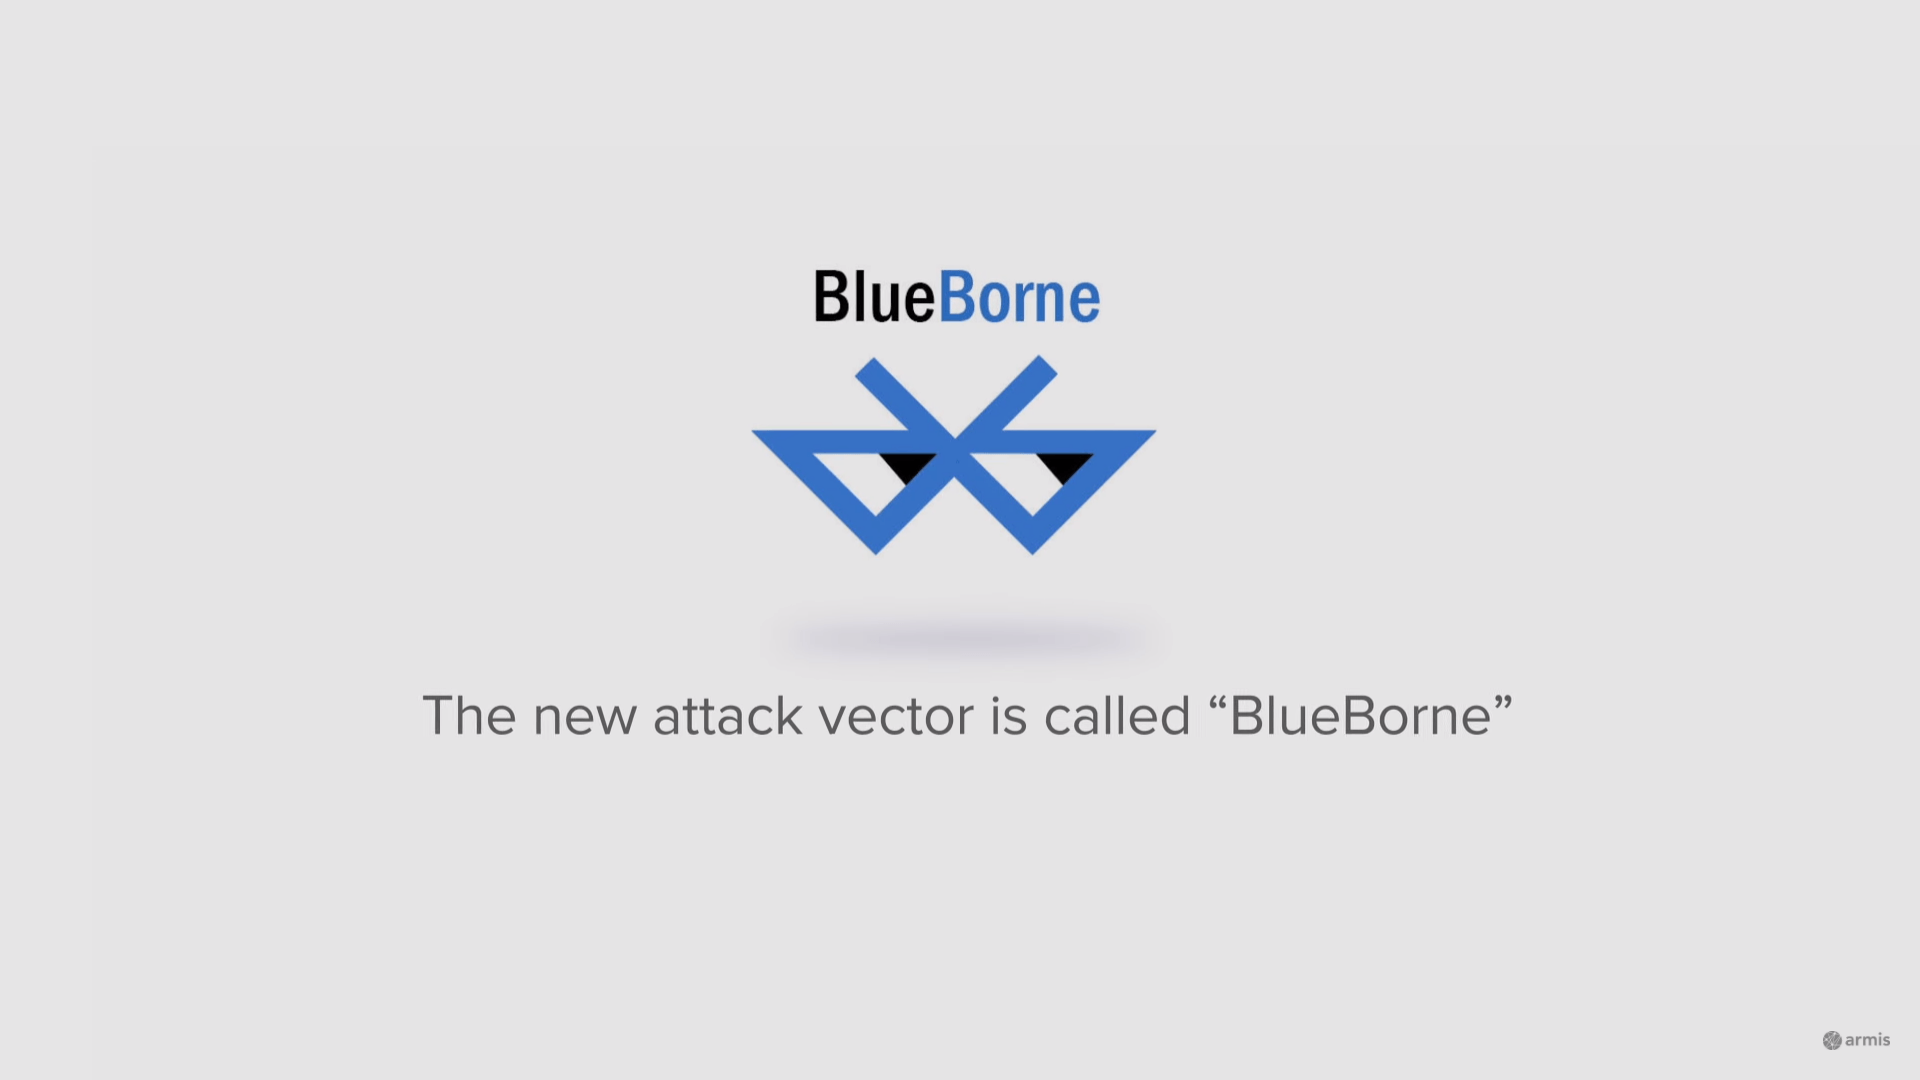 New vulnerabilities allow hackers into devices via Bluetooth